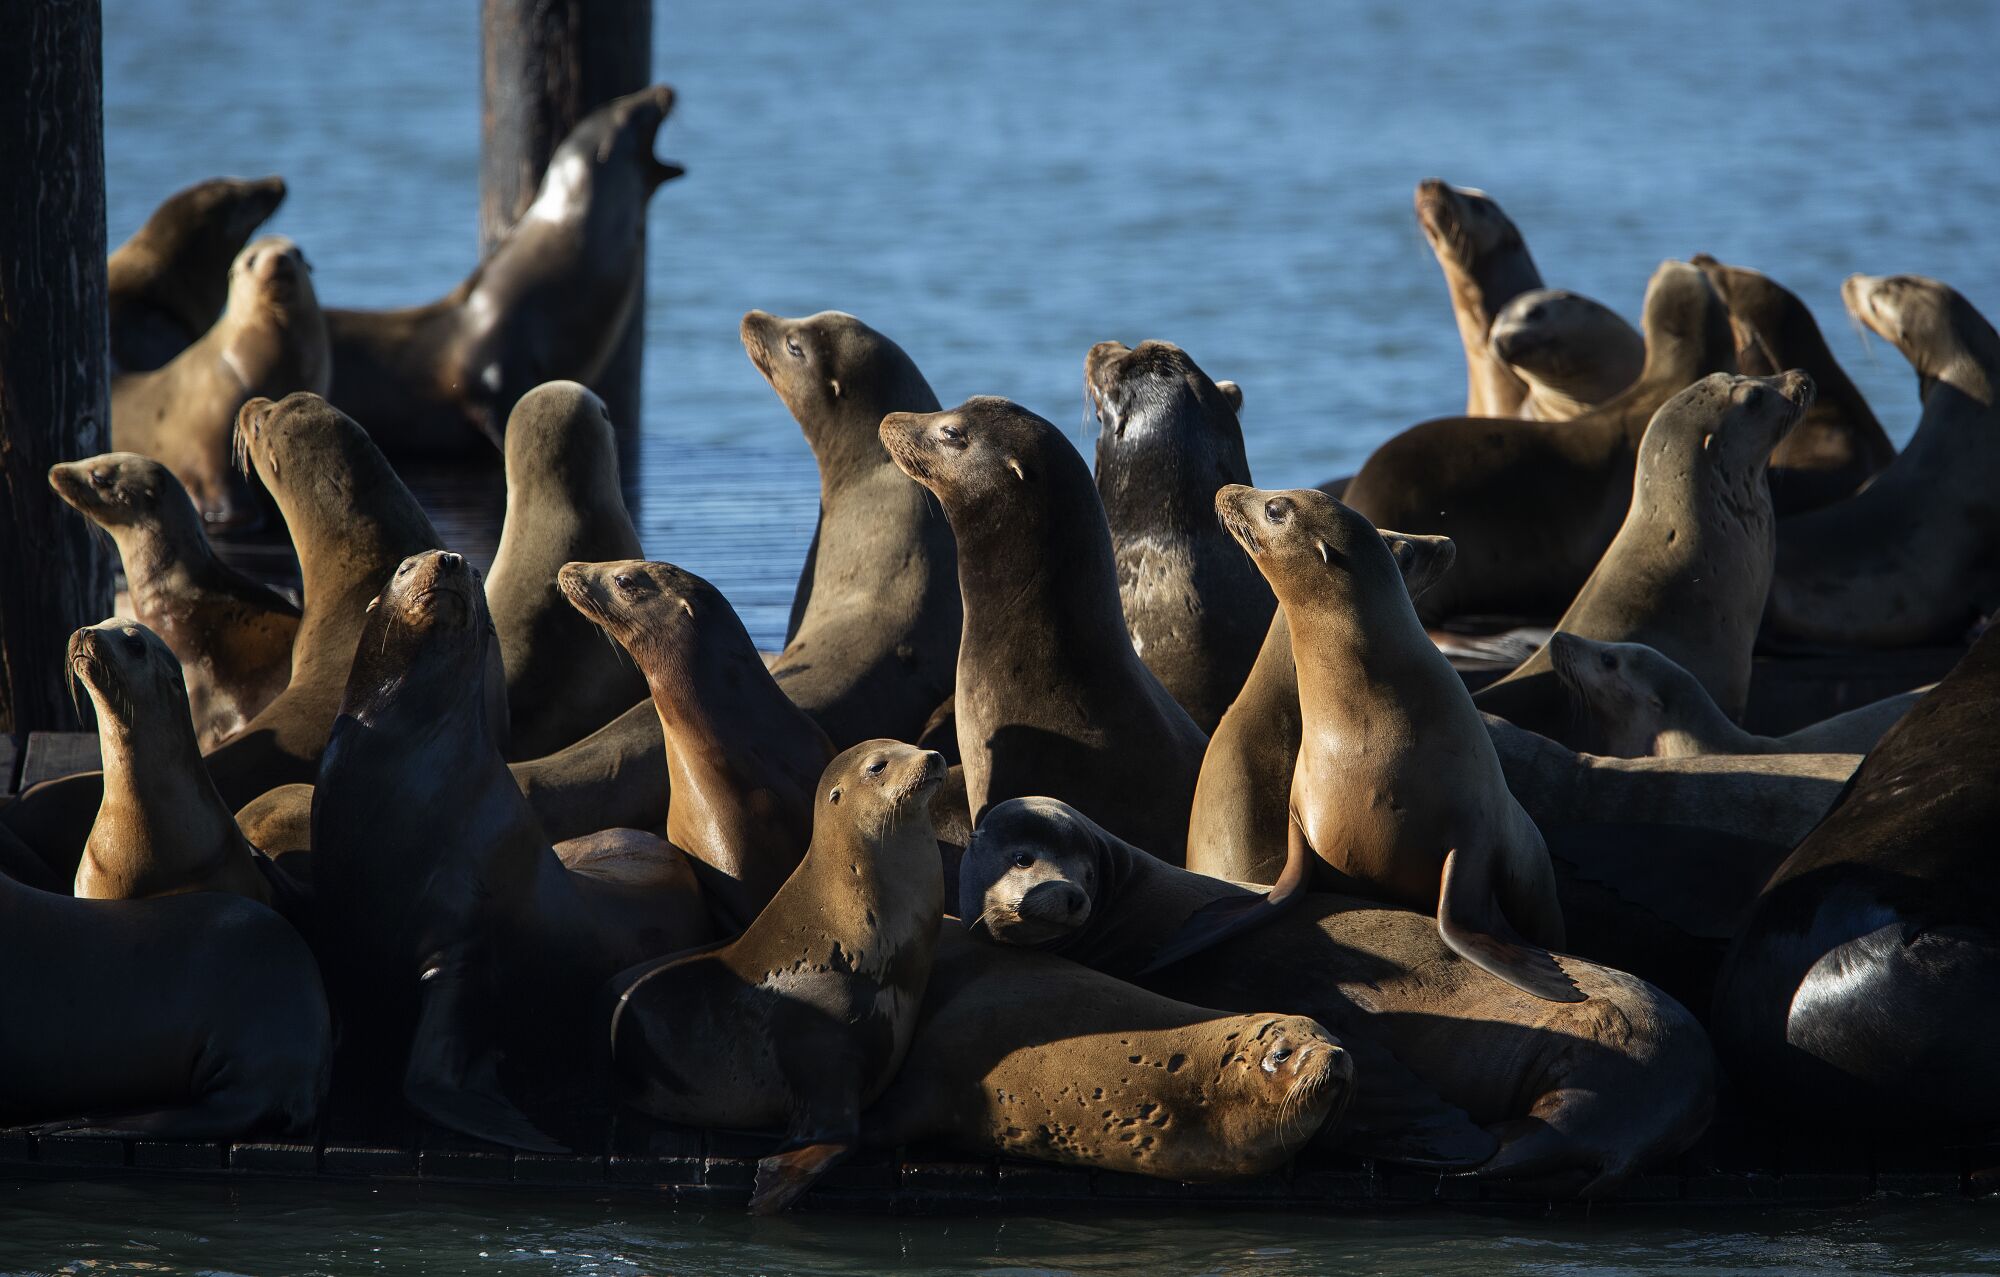 Sea lions are opportunistic predators that typically feed on mackerel, sardines, rockfish, herring and squid. But their numbers are periodically culled by El Niño-like conditions.